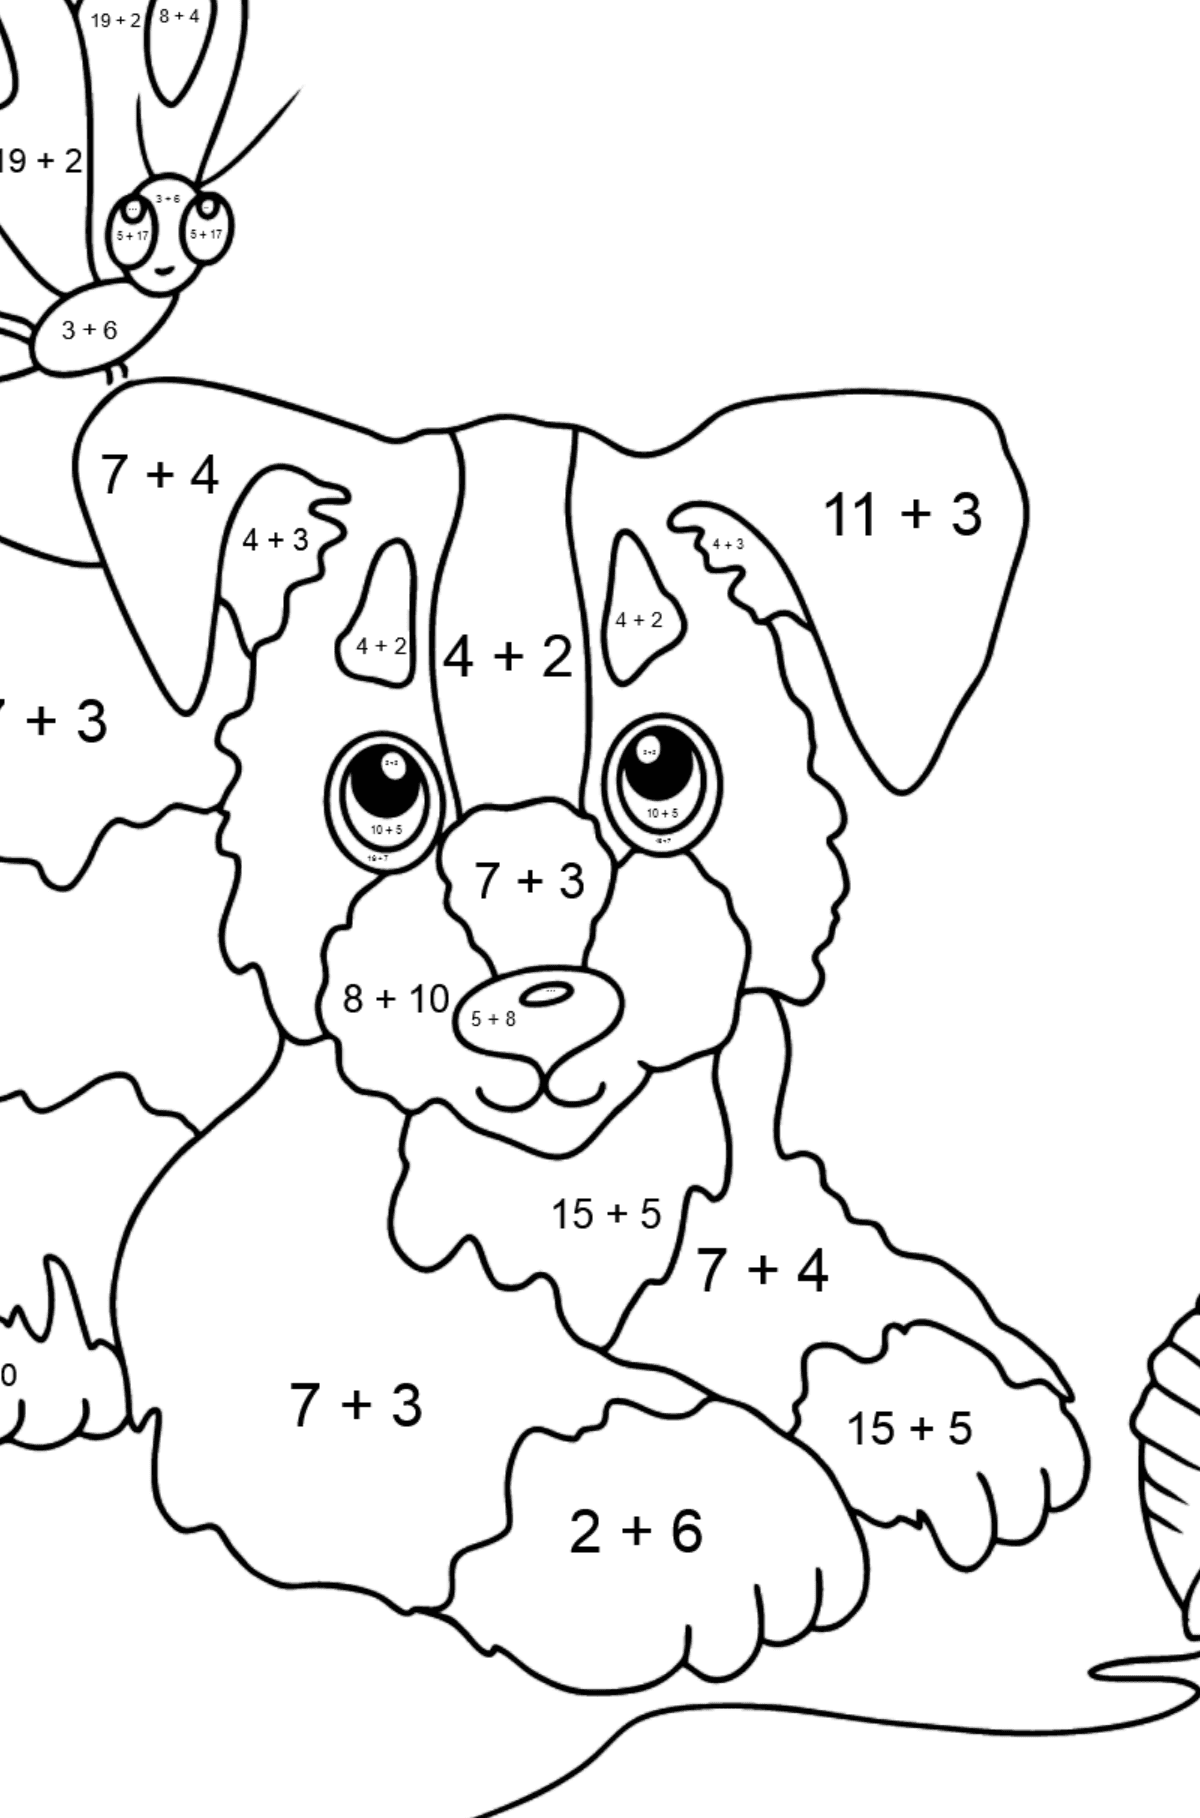 Coloring Page - A Dog is Playing with a Ball of Yarn and Butterflies - Math Coloring - Addition for Kids